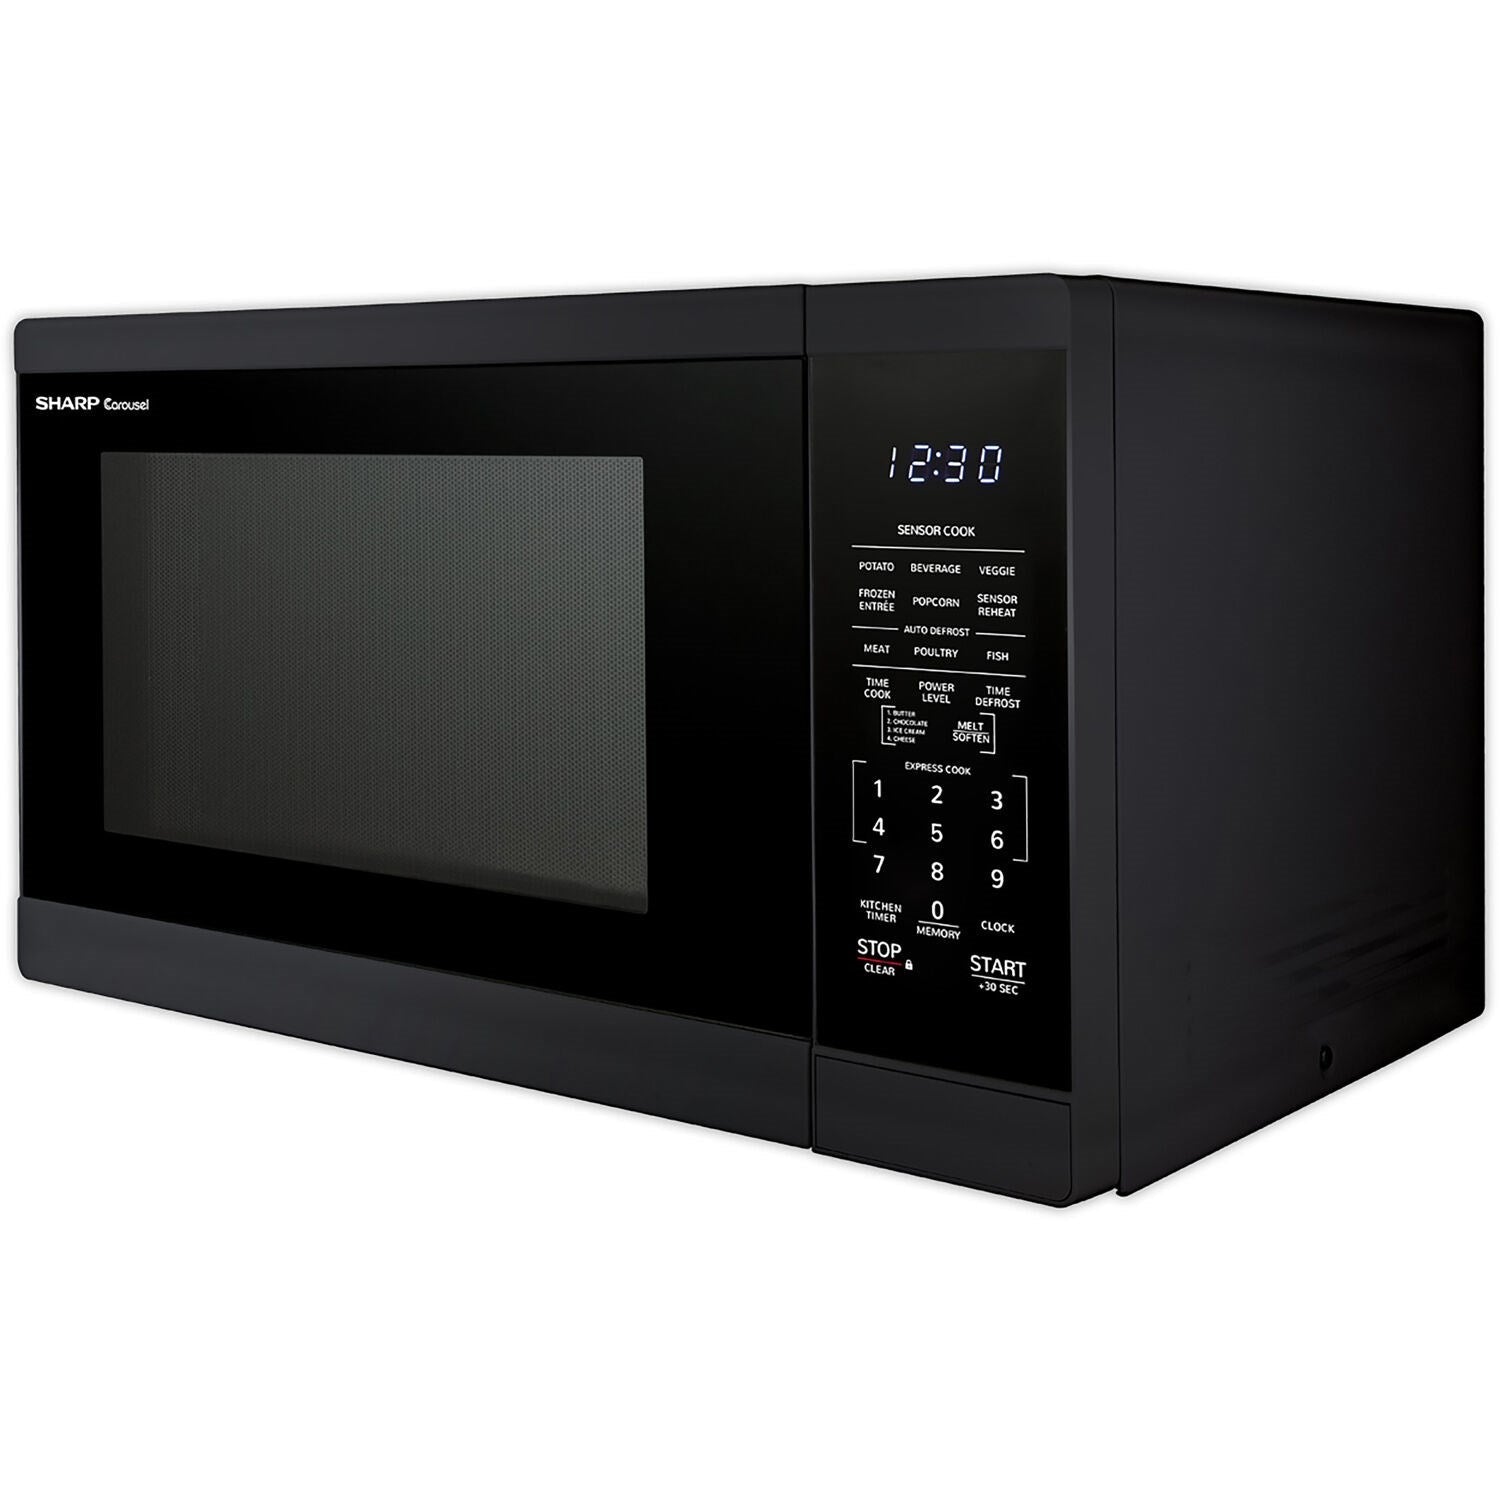 Sharp Carousel 20" 1.4 CU. Ft. 1100W Black Countertop Auto-Touch Control Panel Microwave Oven